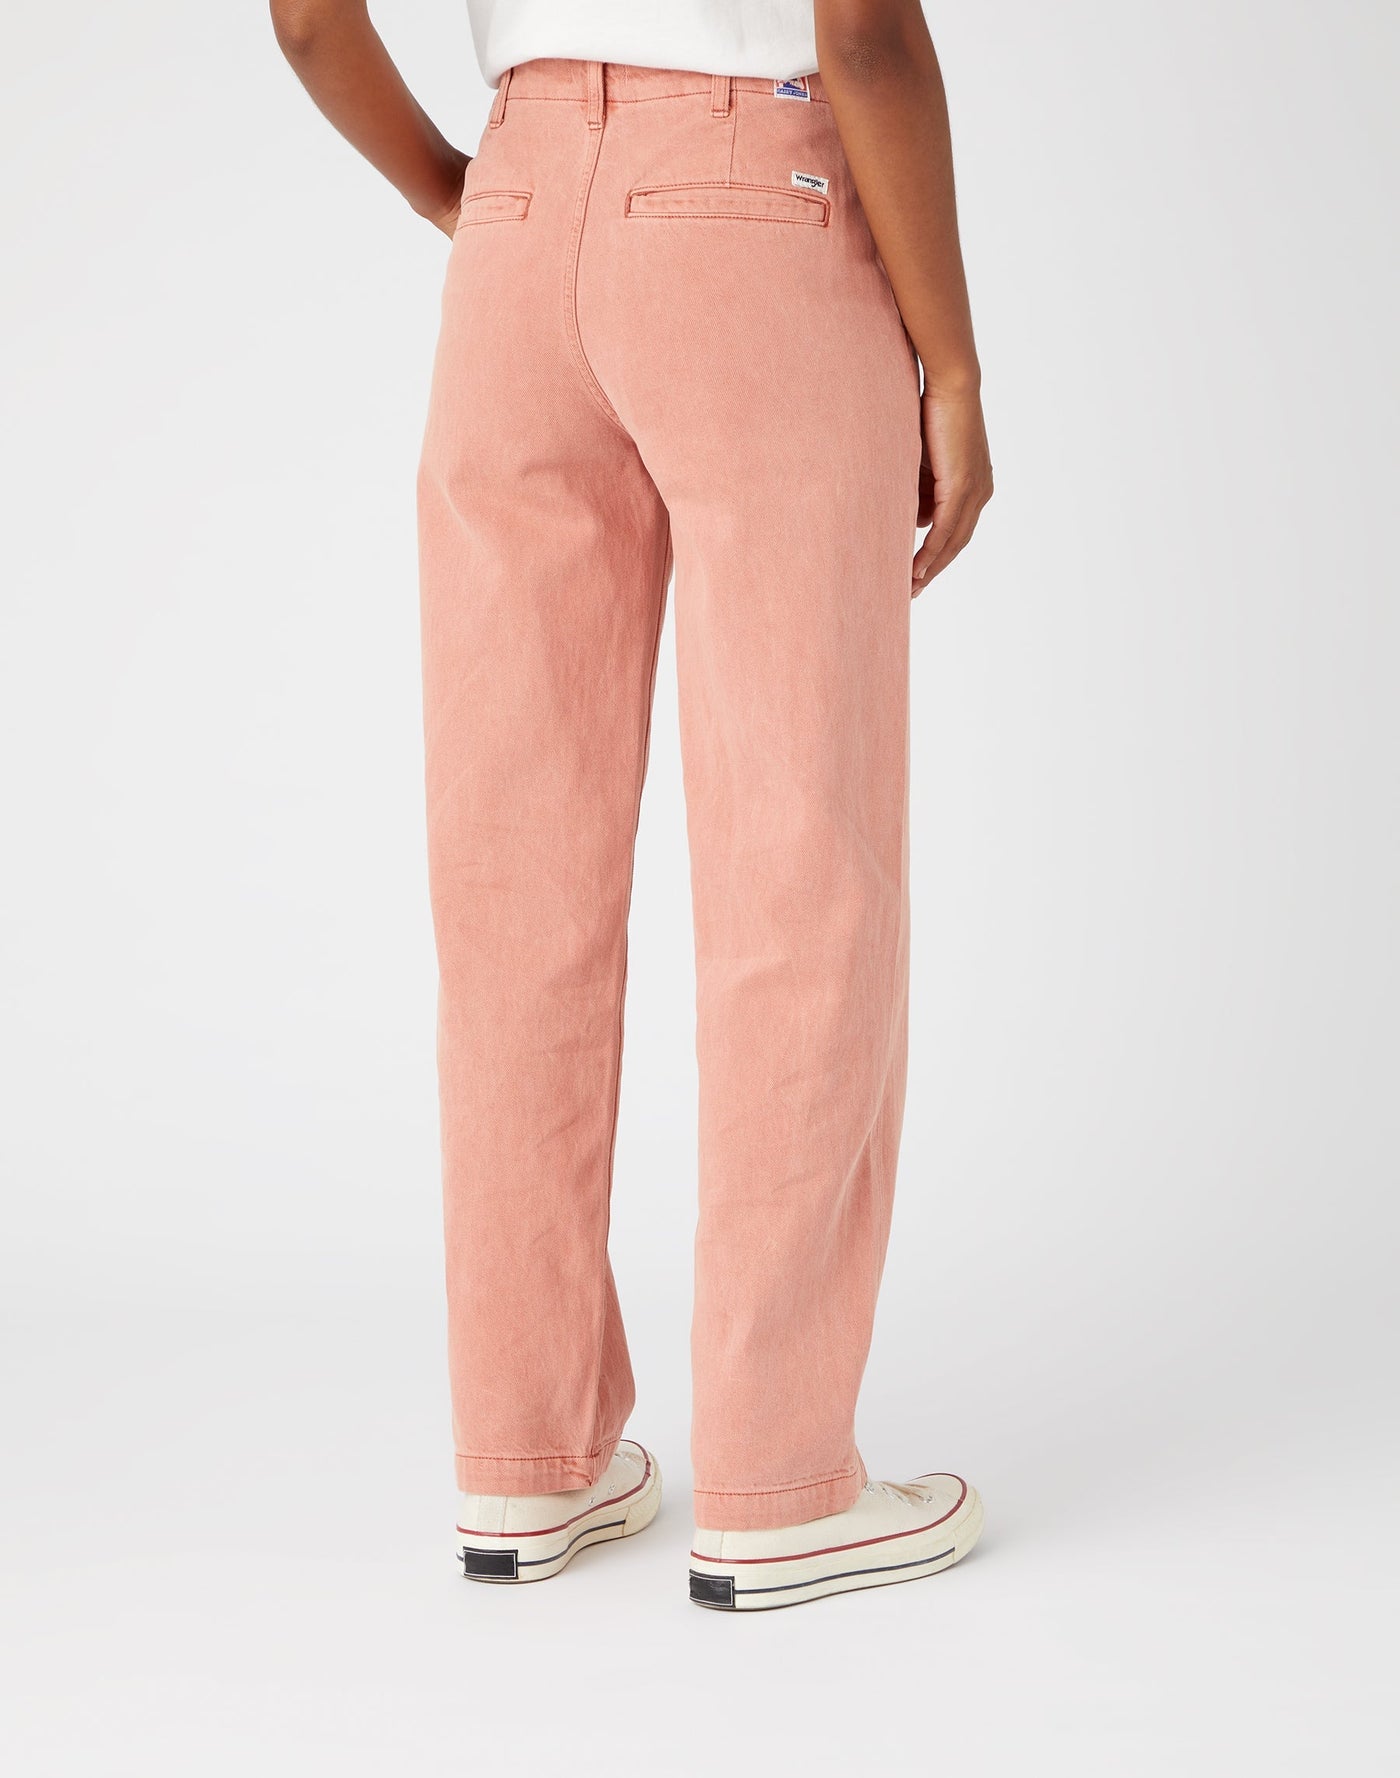 Casey Jones Chino W in Mineral Pink Chinos Wrangler   